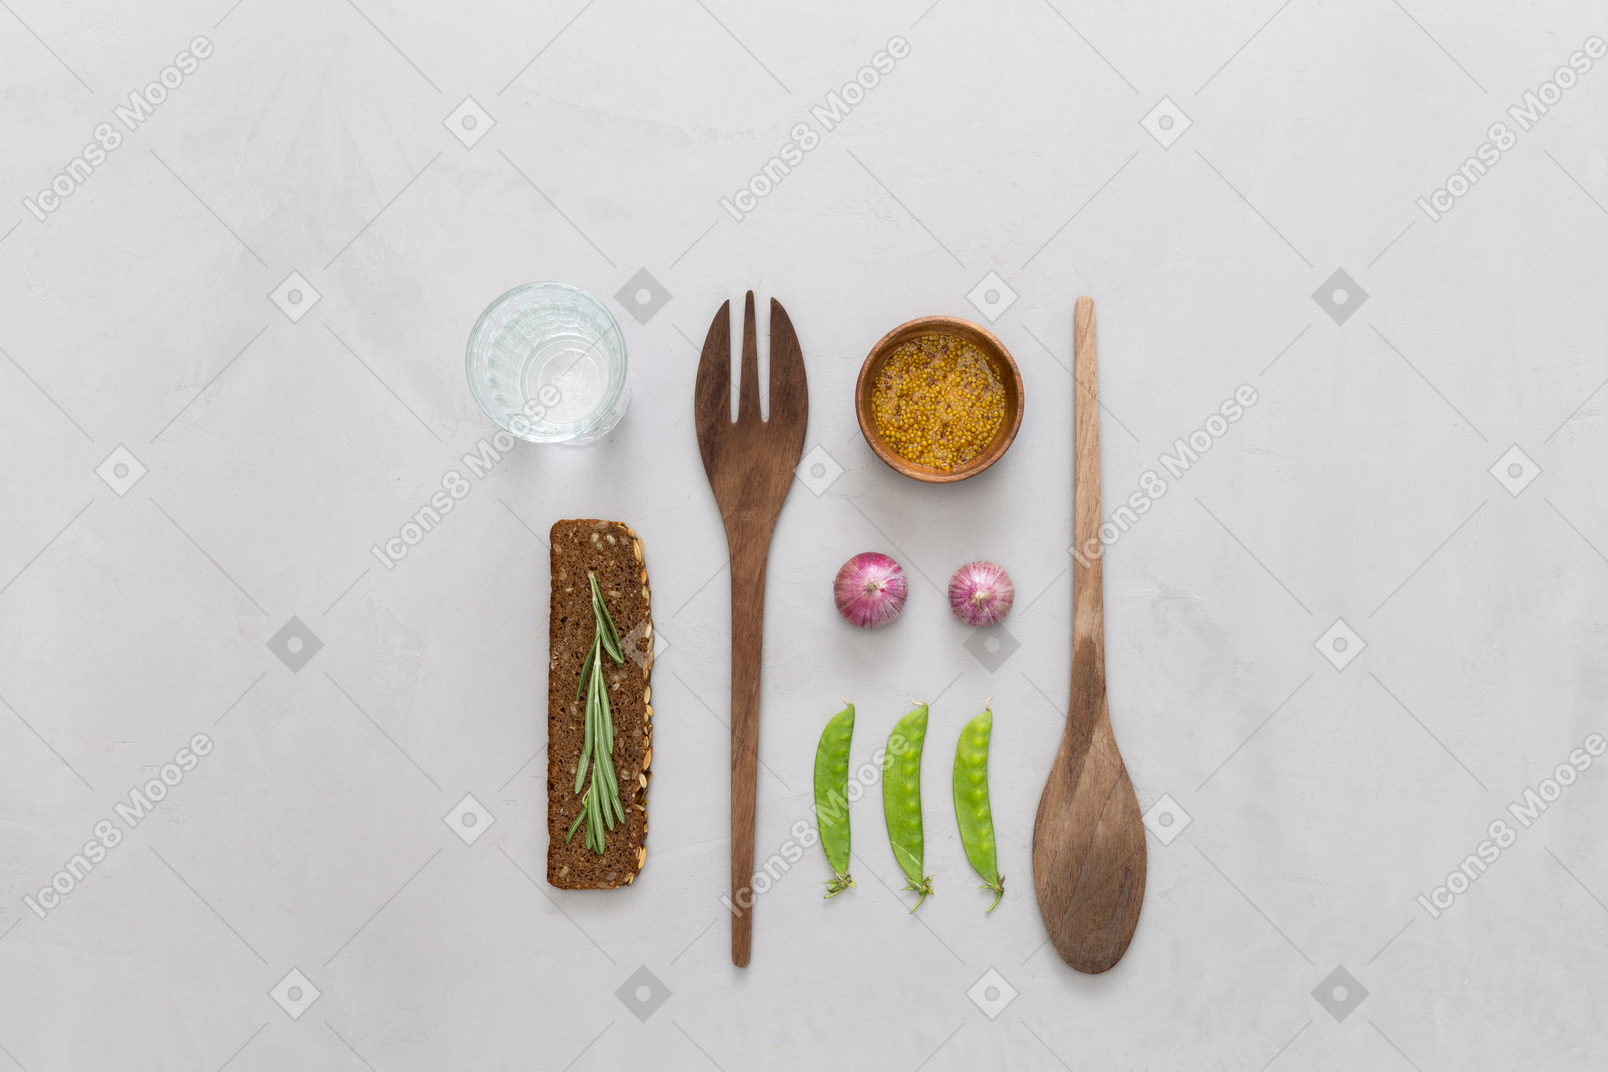 Snack, glass of water, spices and wooden cutlery